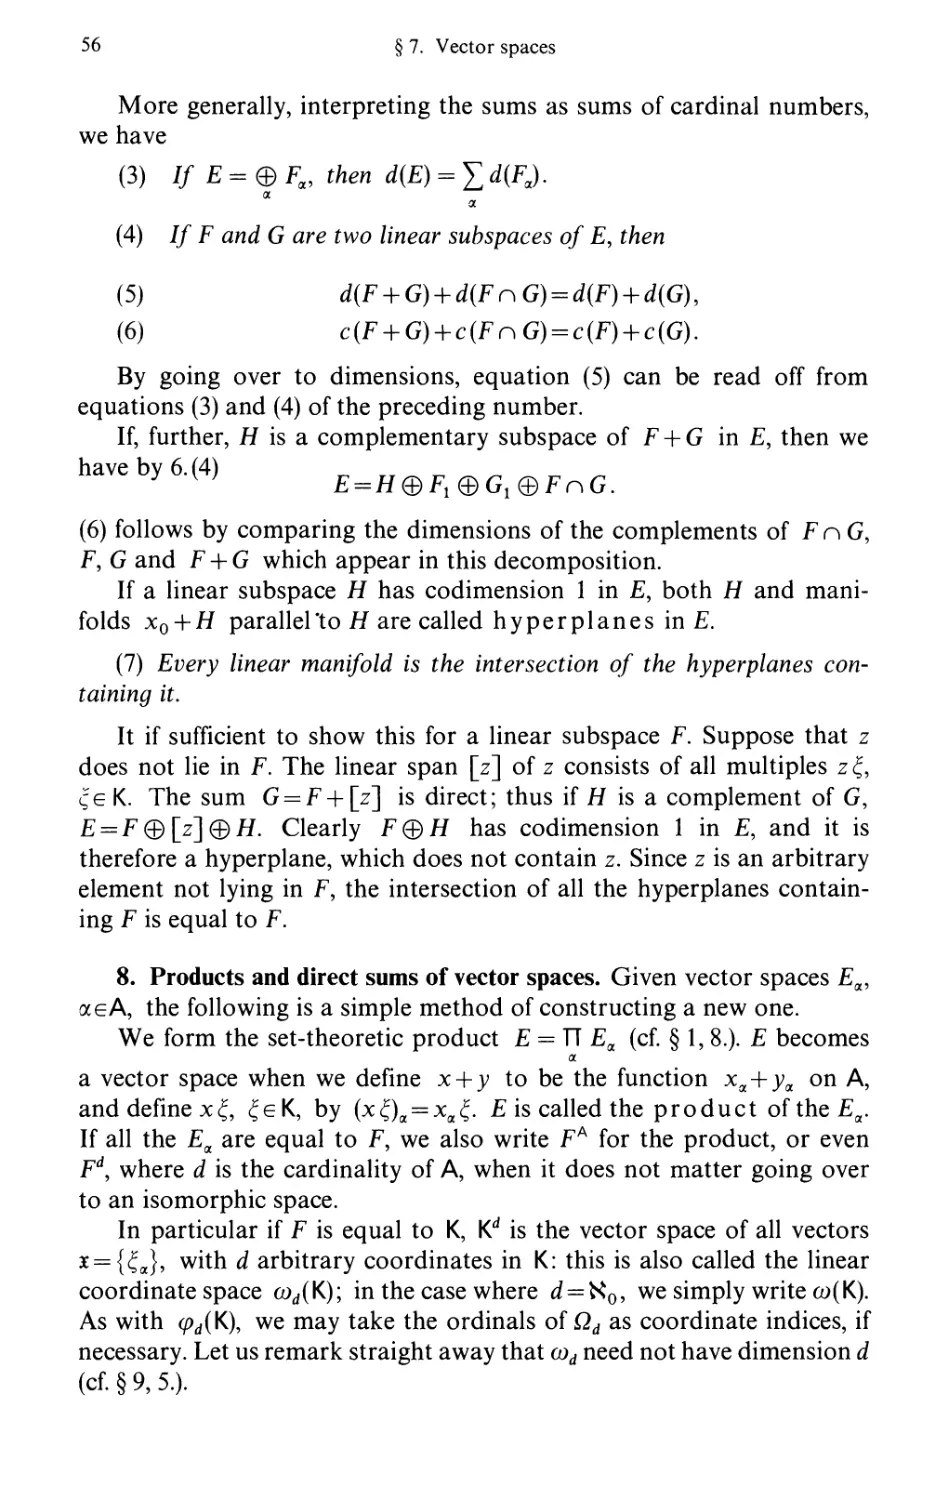 8. Products and direct sums of vector spaces